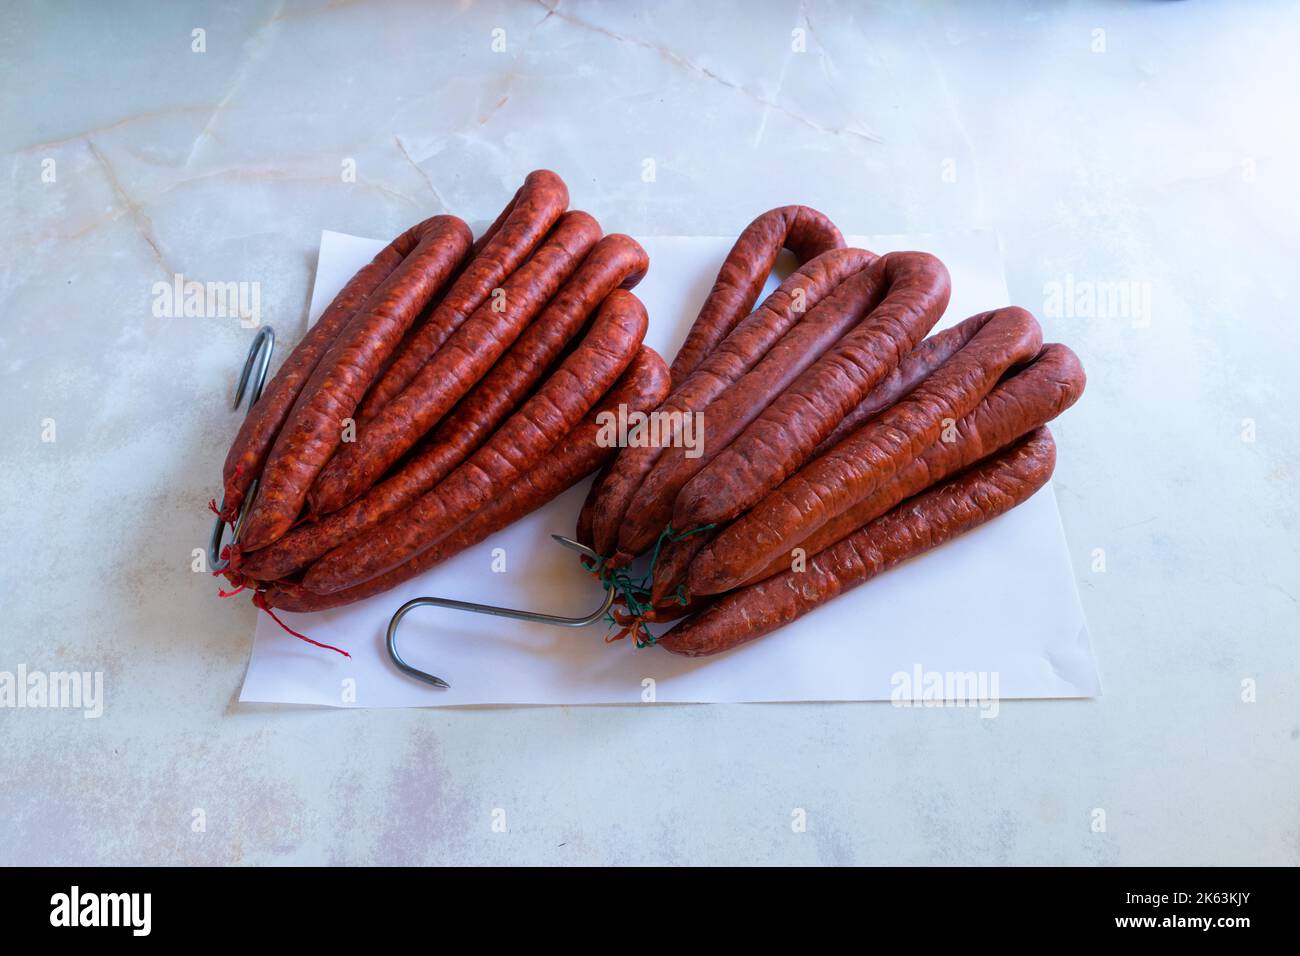 Butcher's pieces: traditional sausages called Longaises Stock Photo